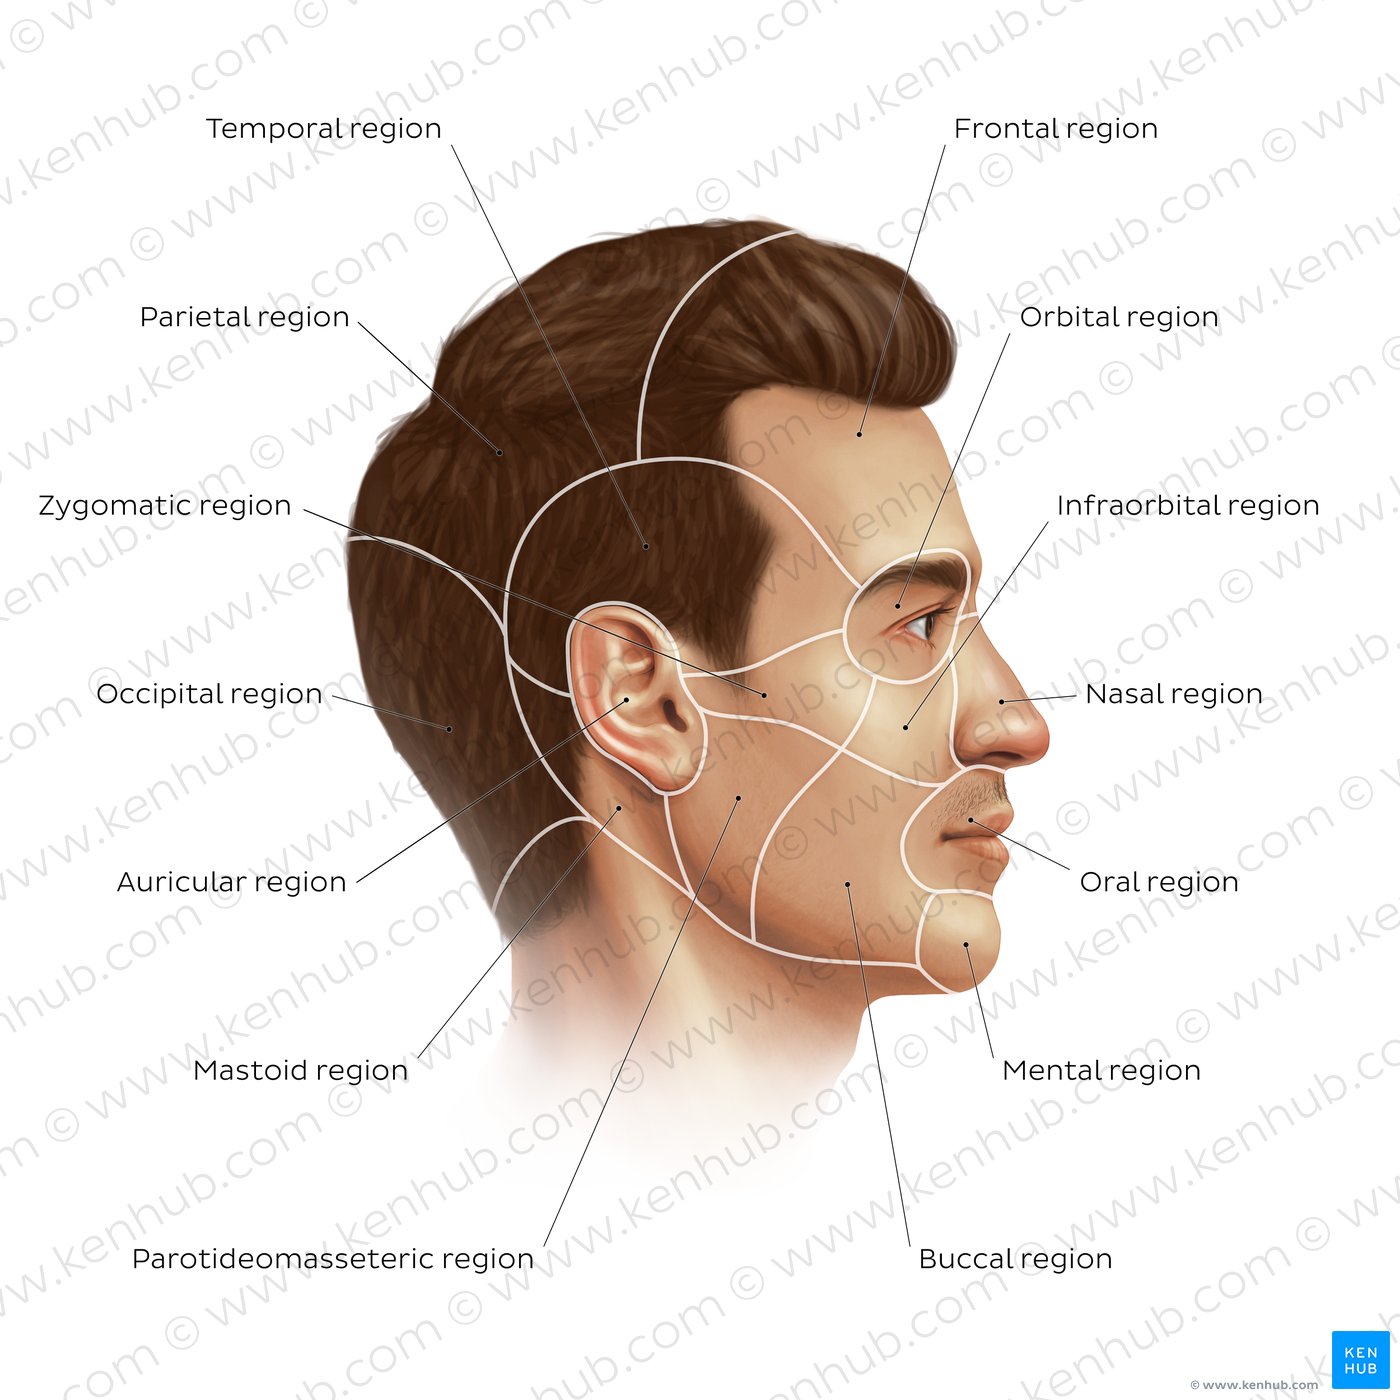 Regions of the face